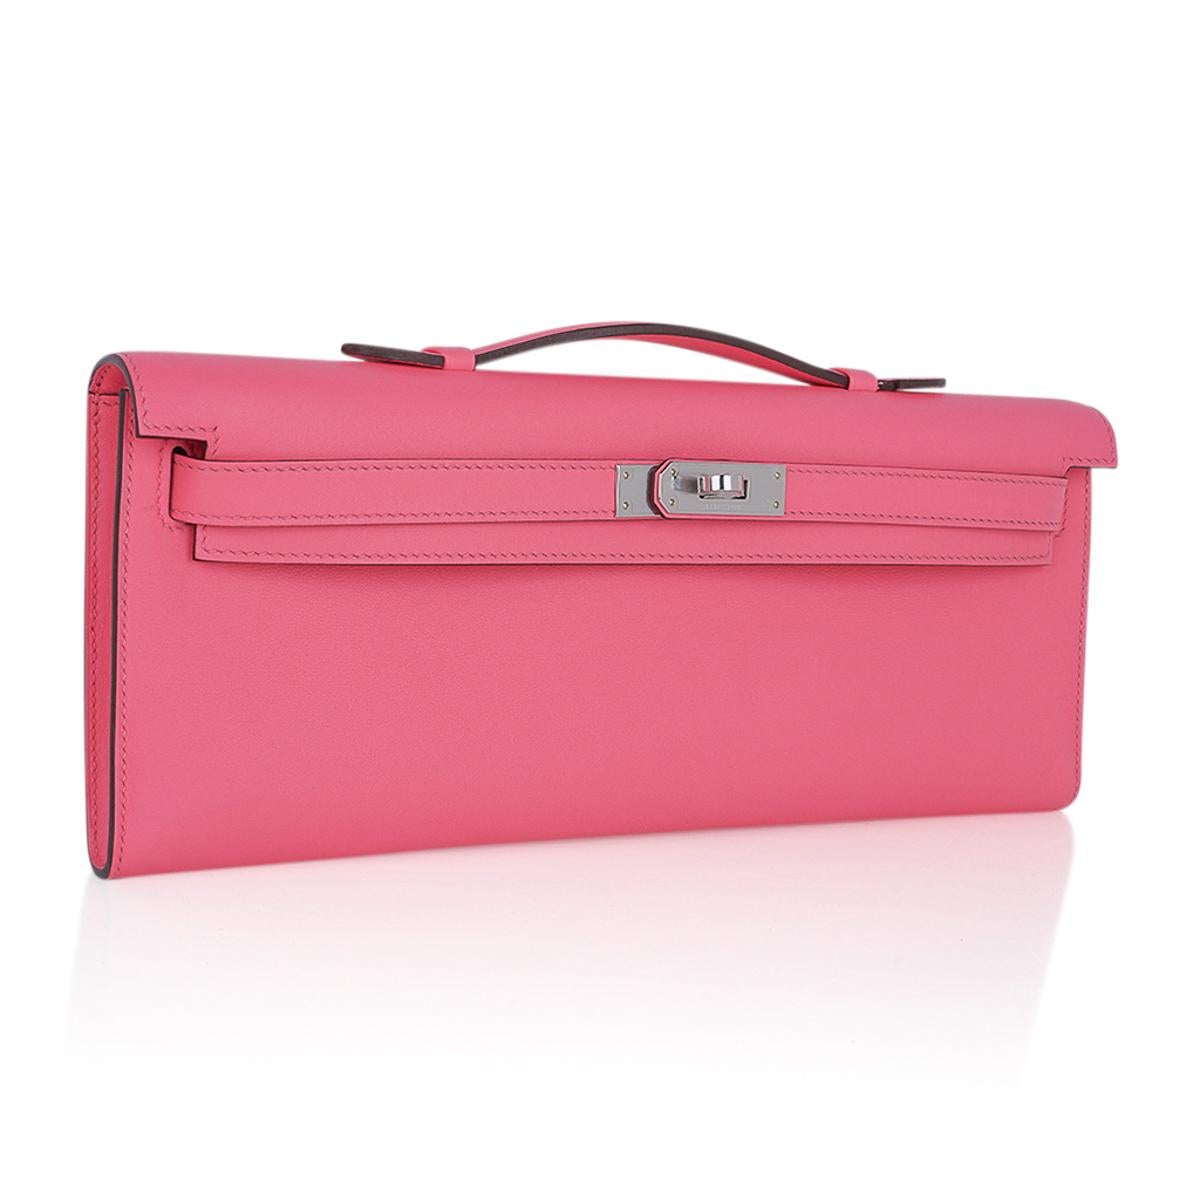 Mightychic offers a timeless Hermes Kelly Cut bag featured in Rose Azalee.
This beautiful pink Kelly Cut clutch is perfect day to evening. 
Swift leather. 
Fresh with palladium hardware. 
NEW or NEVER WORN.   
Comes with sleeper and signature Hermes